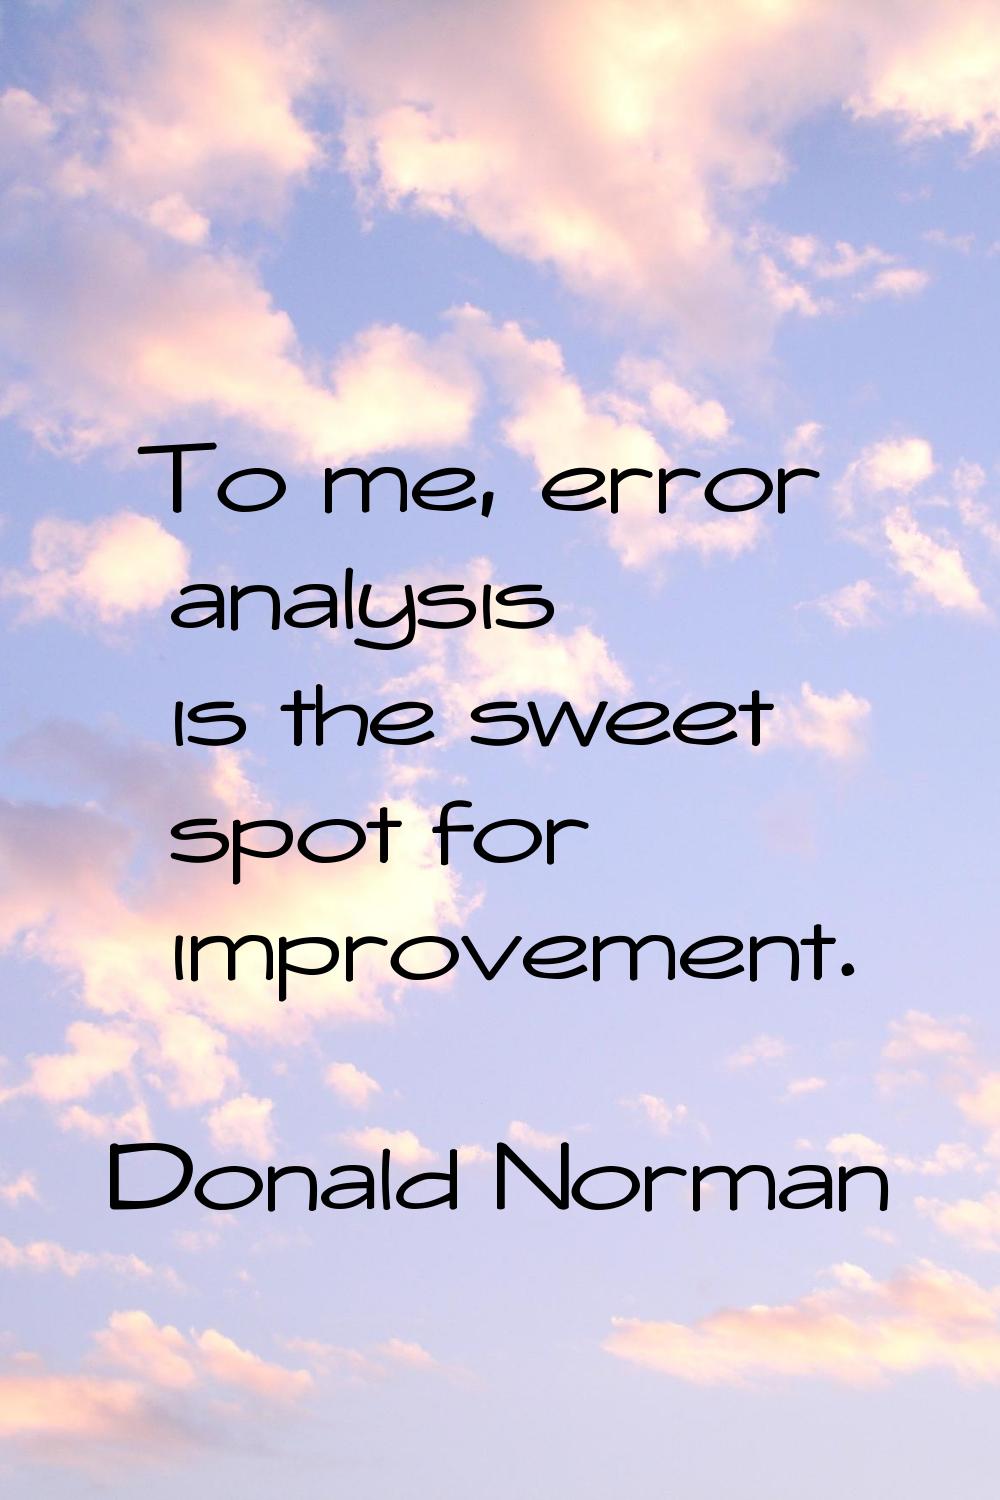 To me, error analysis is the sweet spot for improvement.